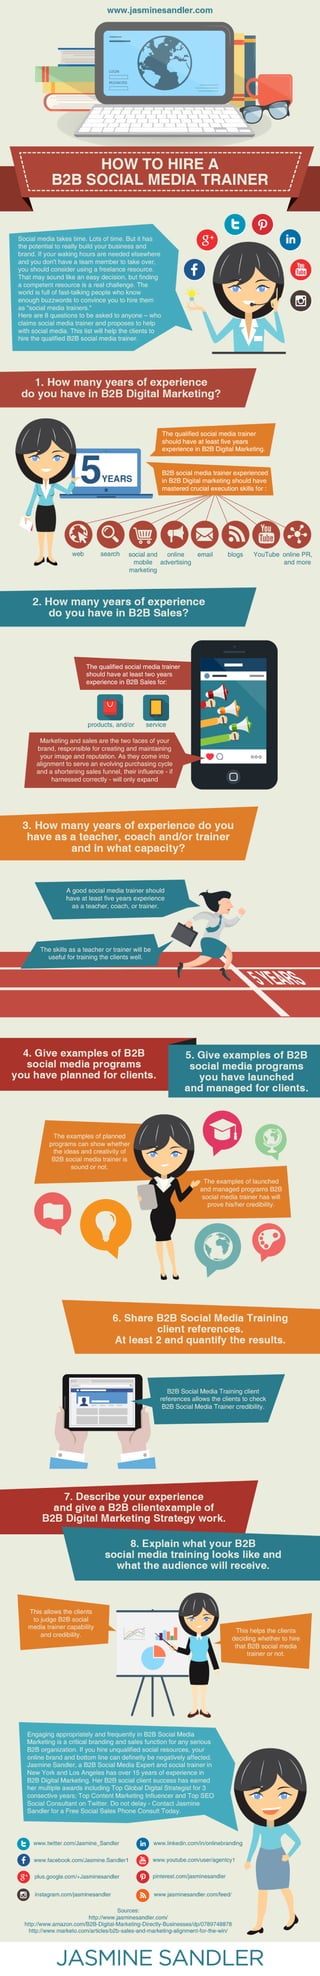 How to Hire a B2B Social Media Trainer [Infographic]